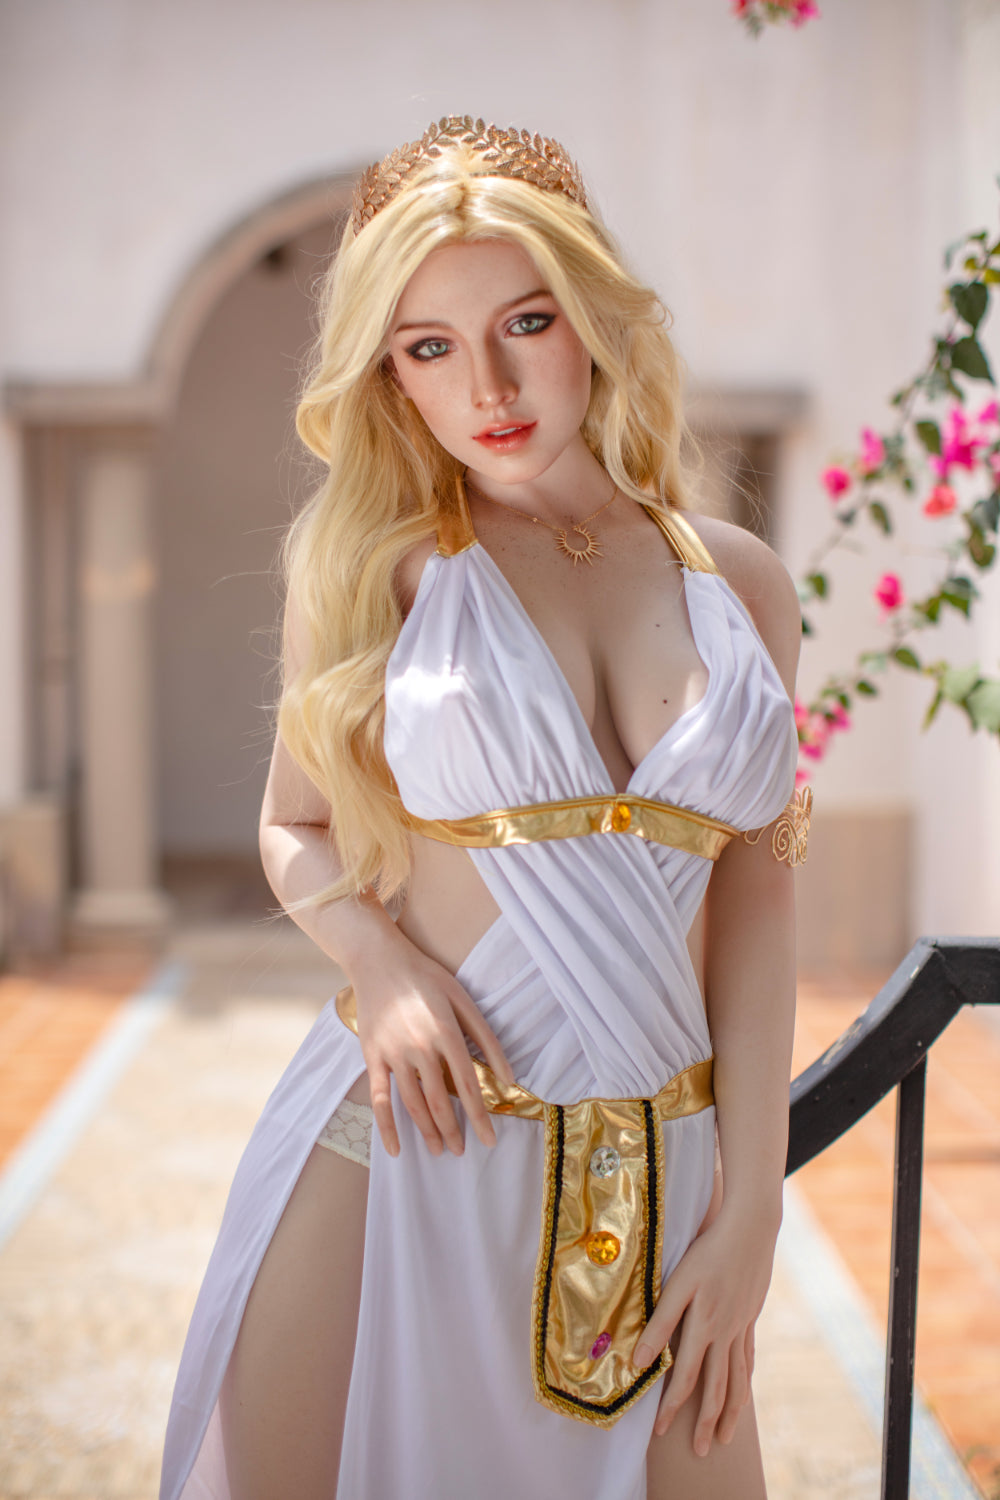 Starpery 172 cm F - Rozanne | Buy Sex Dolls at DOLLS ACTUALLY